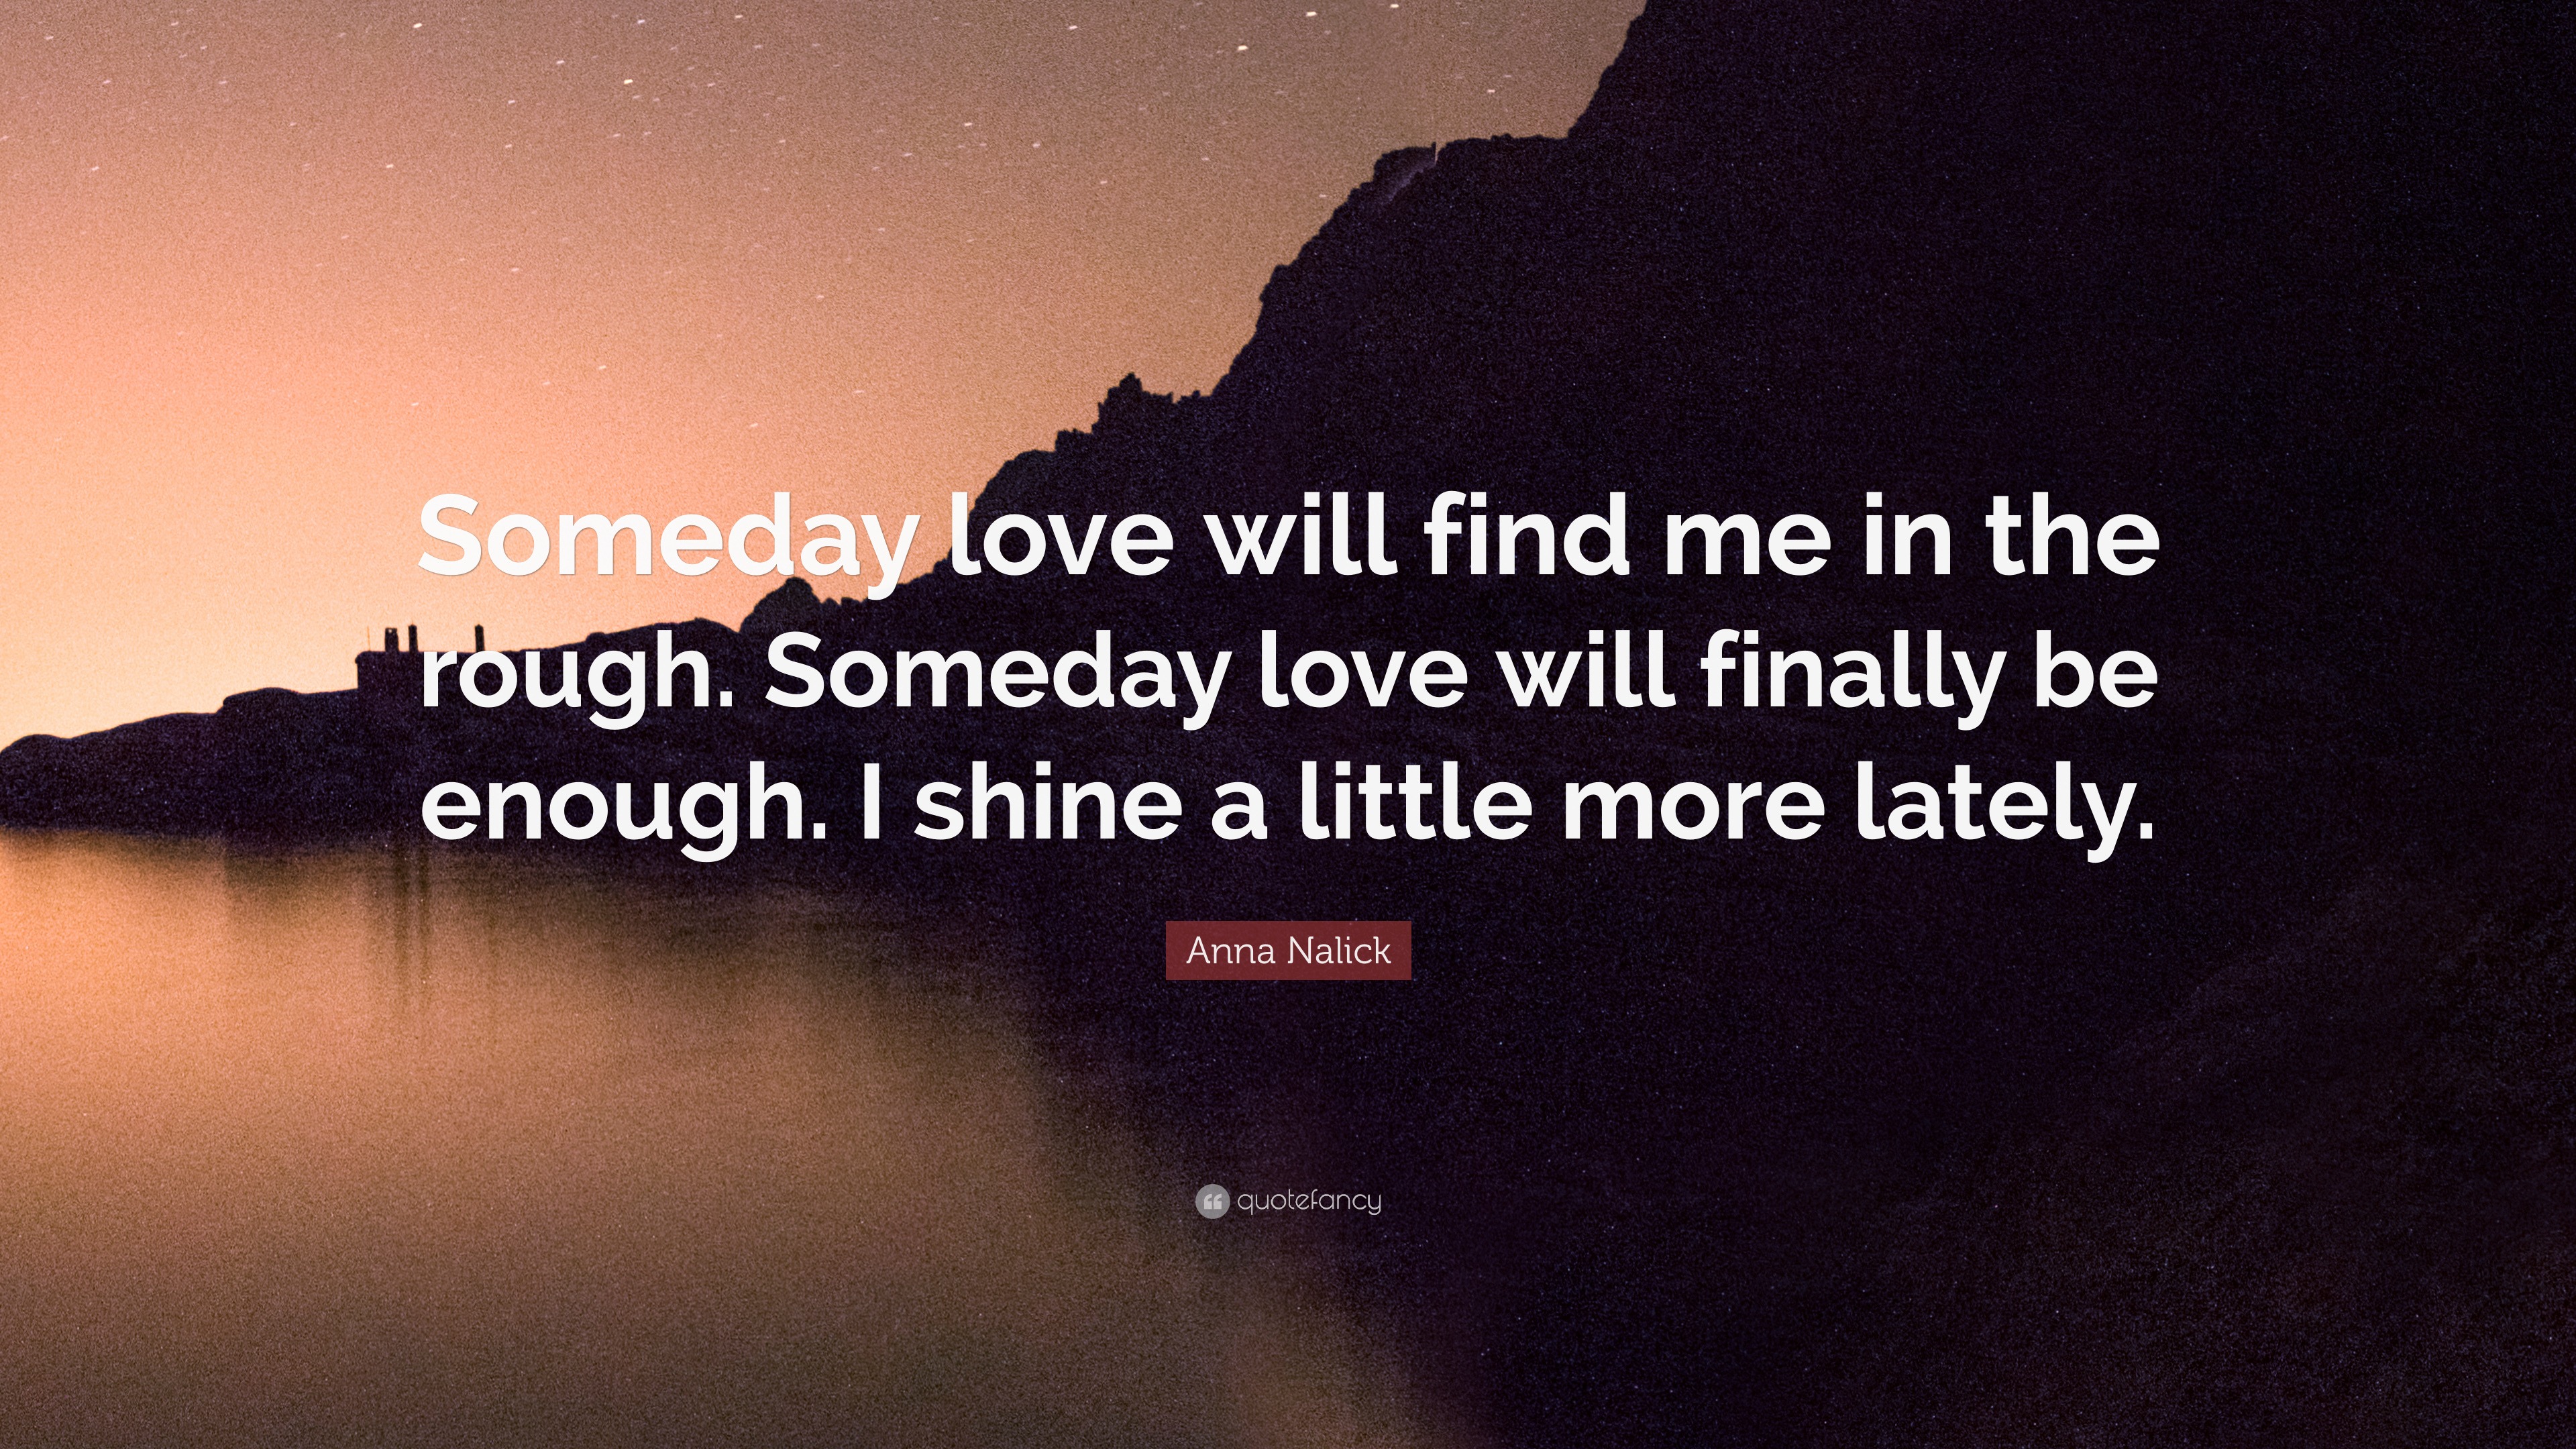 Anna Nalick Quote: “Someday love will find me in the rough. Someday ...